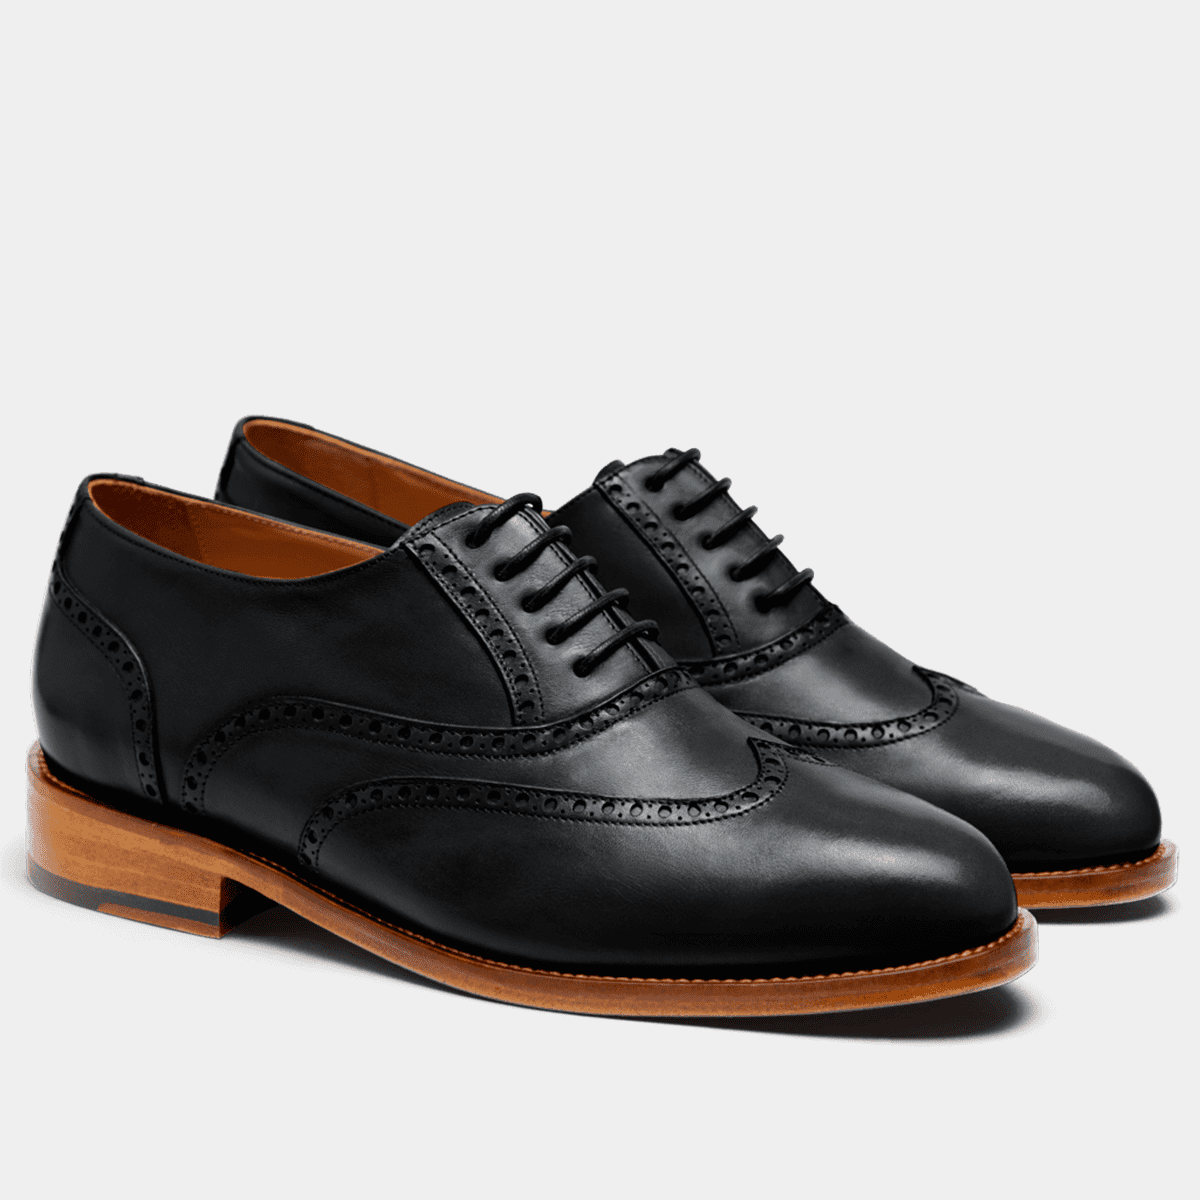 Women's Oxfords Shoes Online - Sumissura